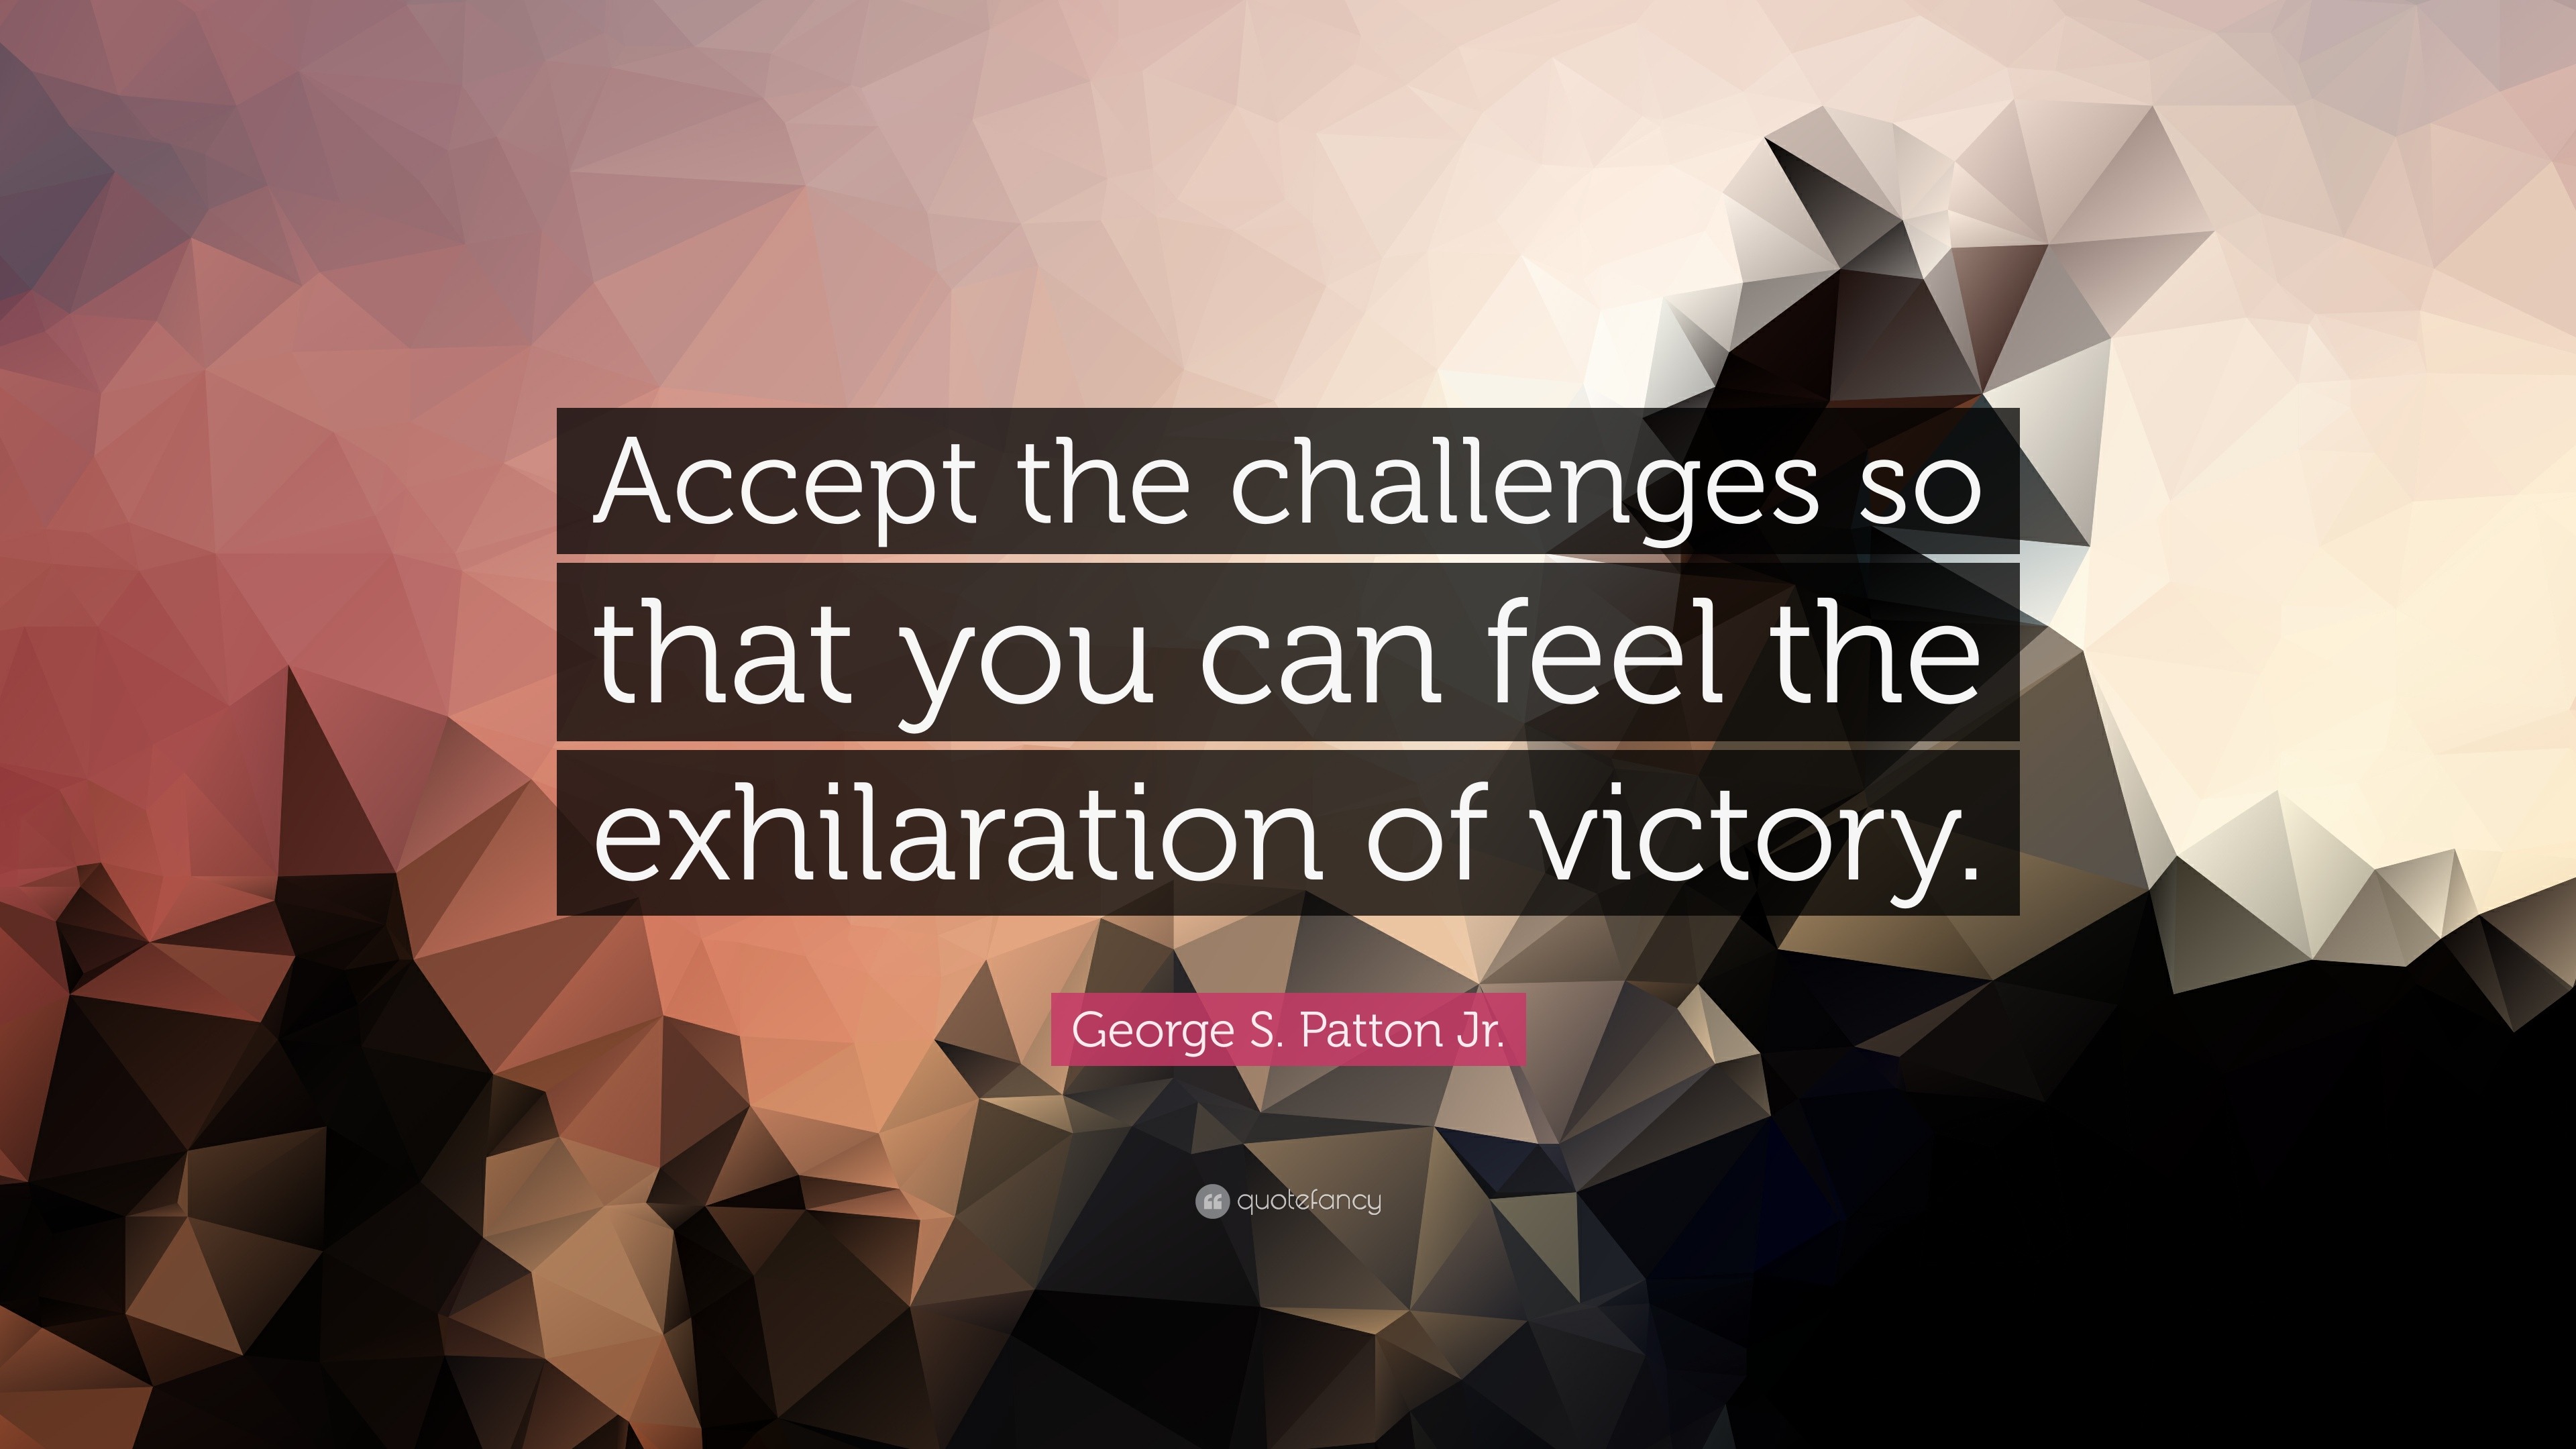 George S. Patton Jr. Quote: “Accept the challenges so that you can feel